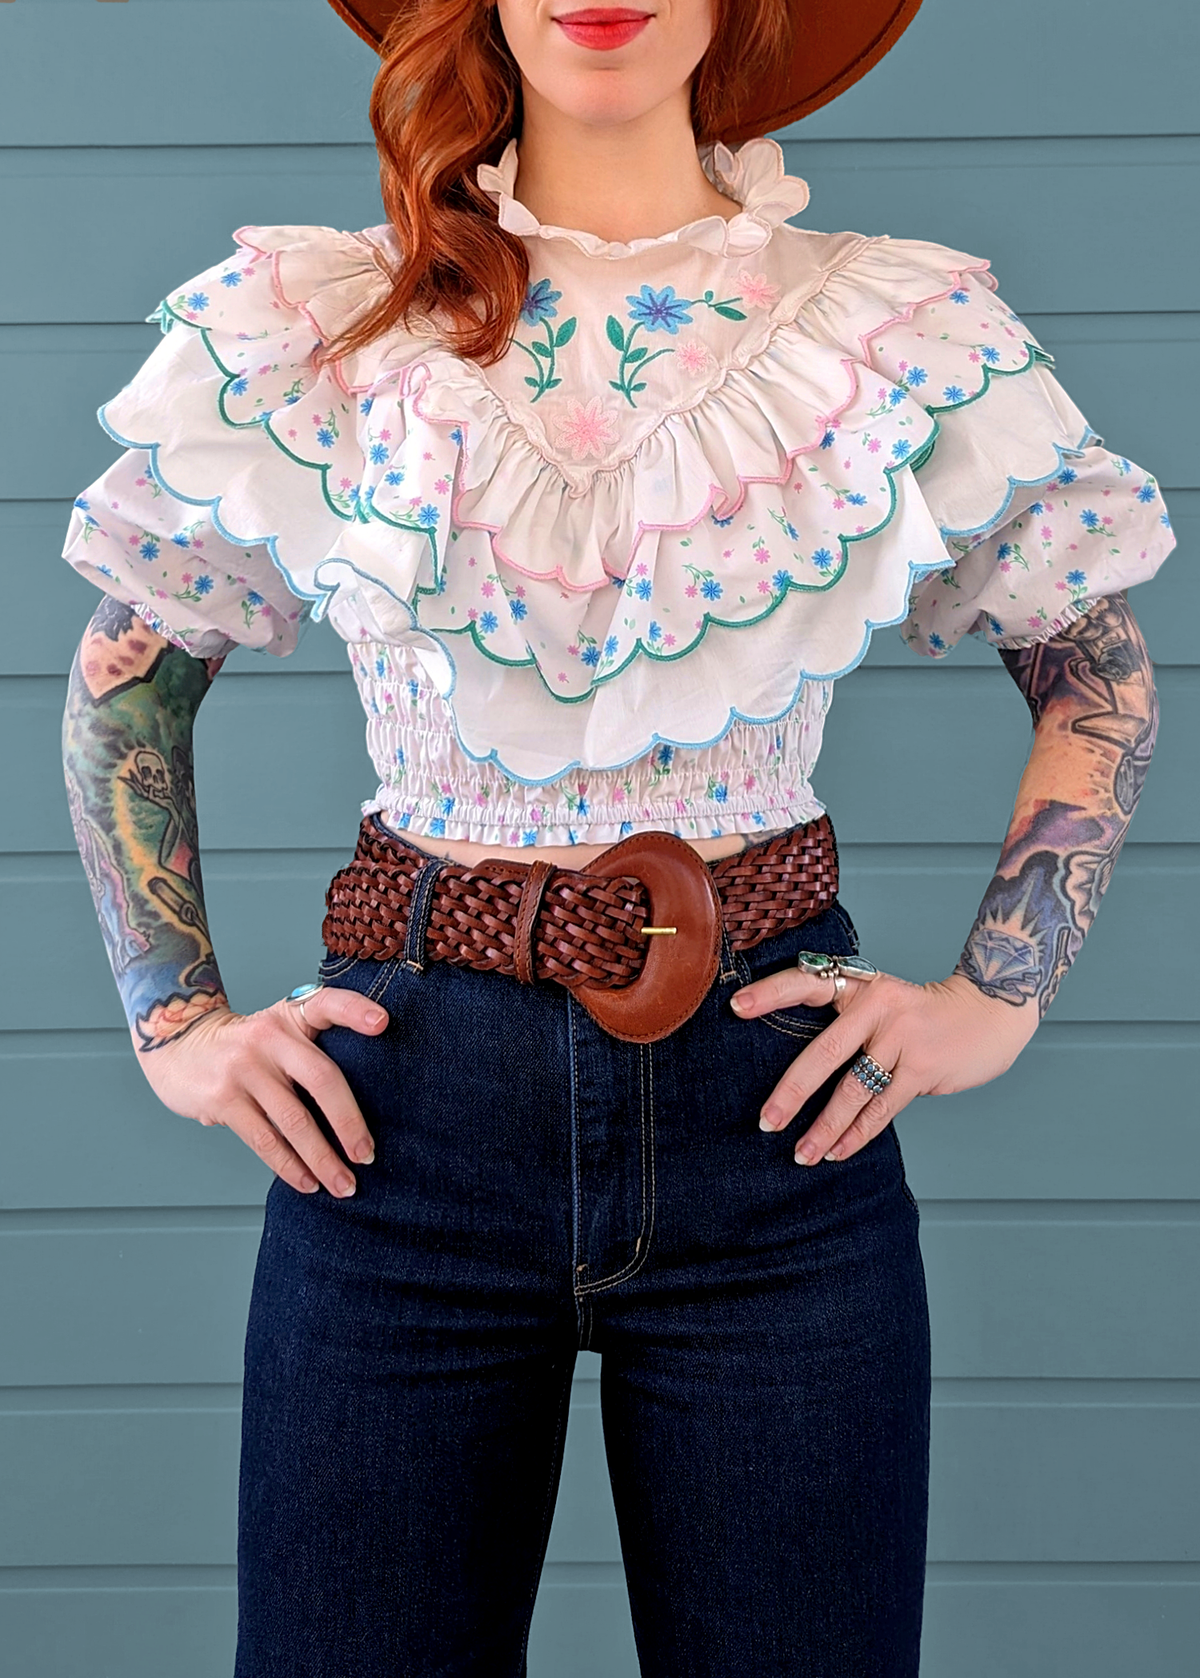 80s inspired prairie ruffle crop blouse with tiered ruffles, high neckline, embroidered floral details, puff sleeved, and smocked bottom. White cotton with blue and pink floral pattern. By Glamorous UK